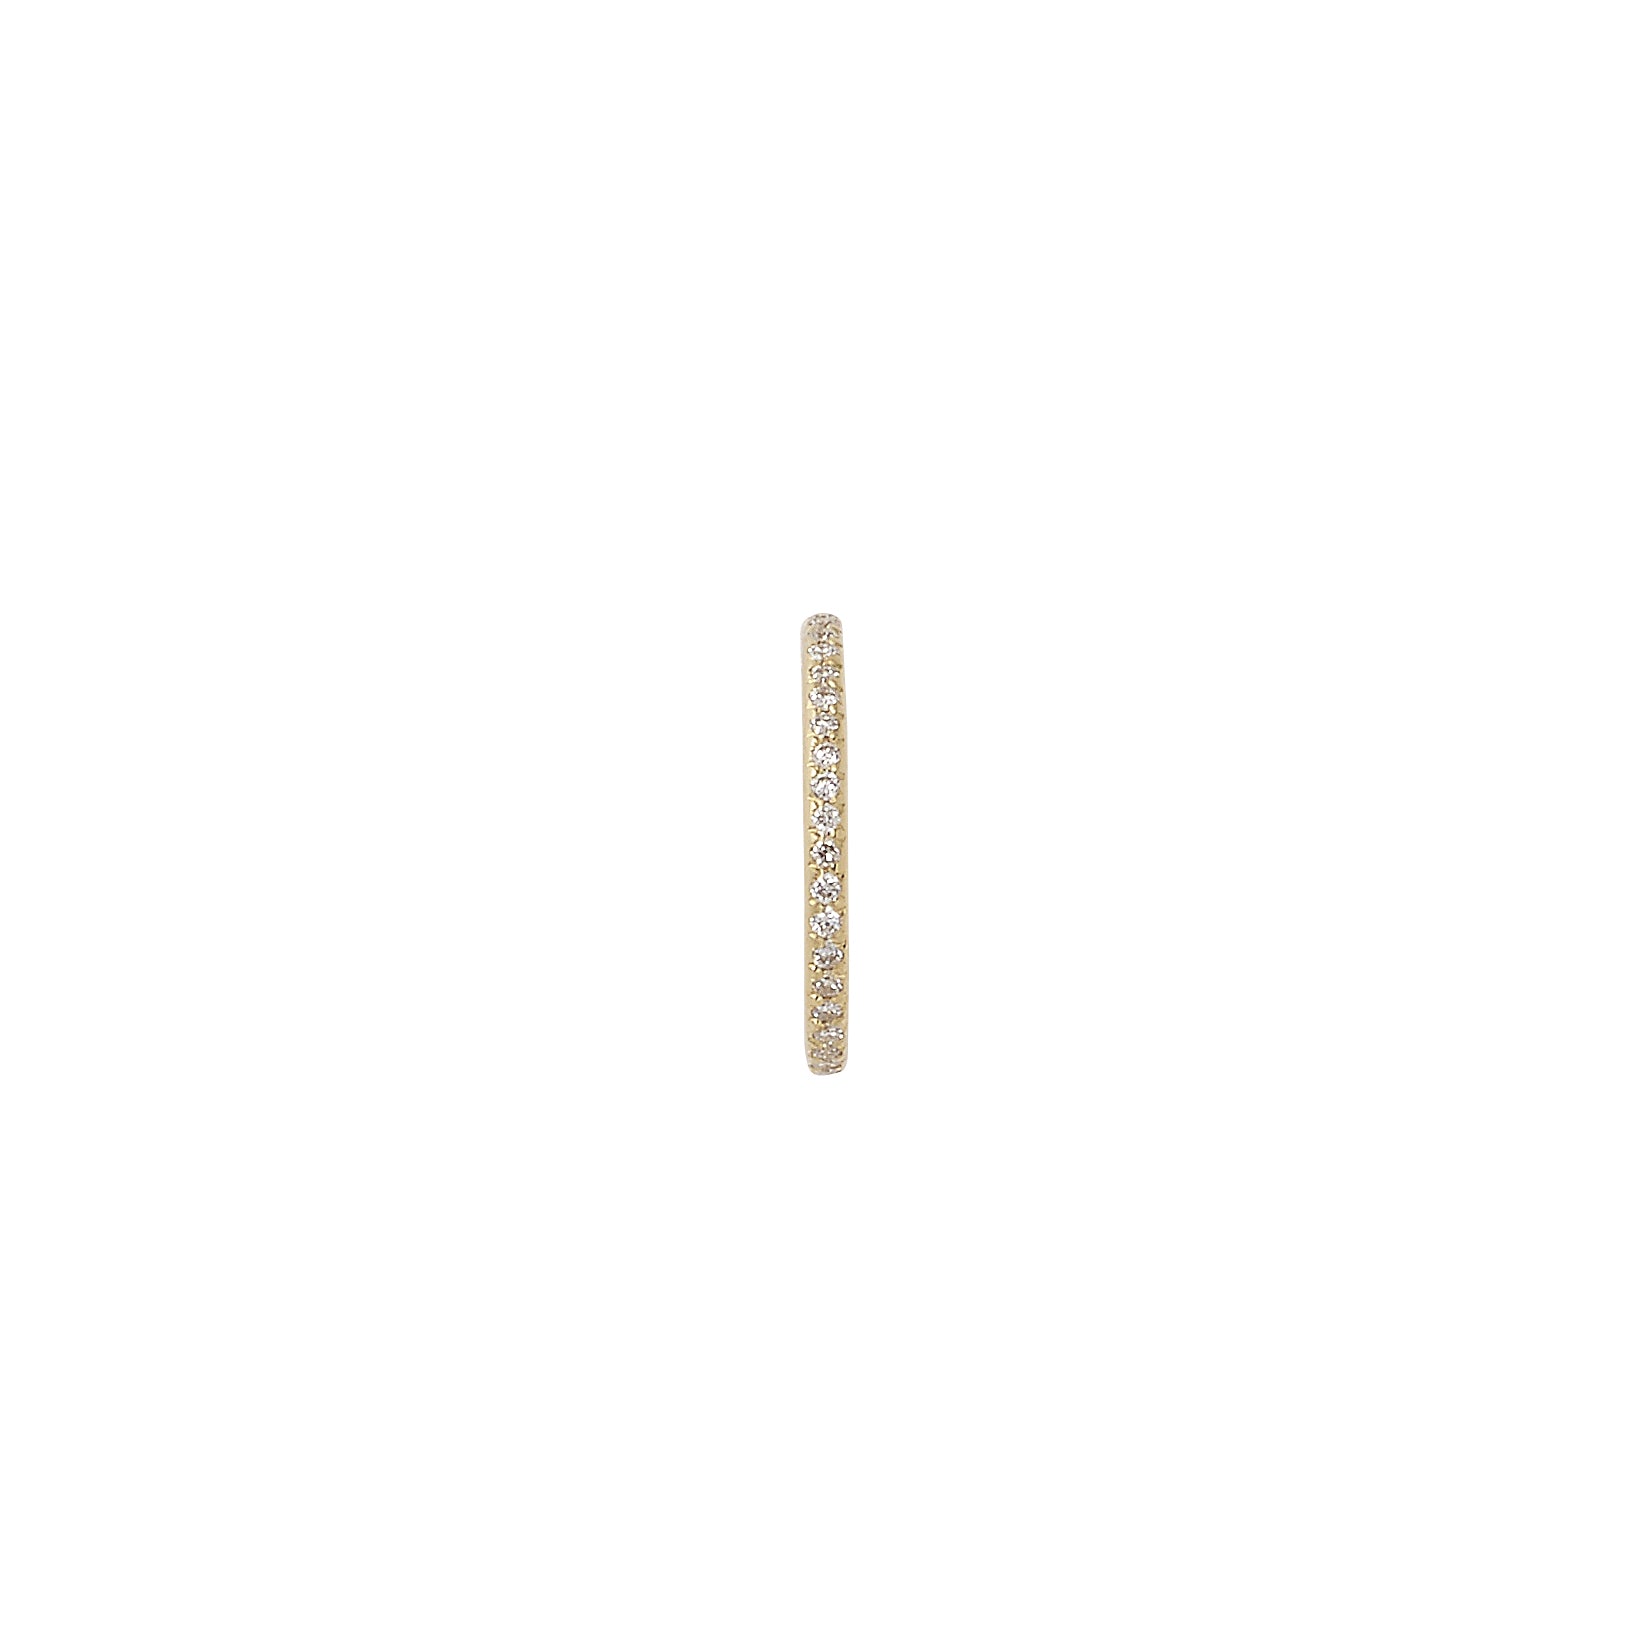 18ct yellow gold hoop earrings pave set with a line of Diamonds